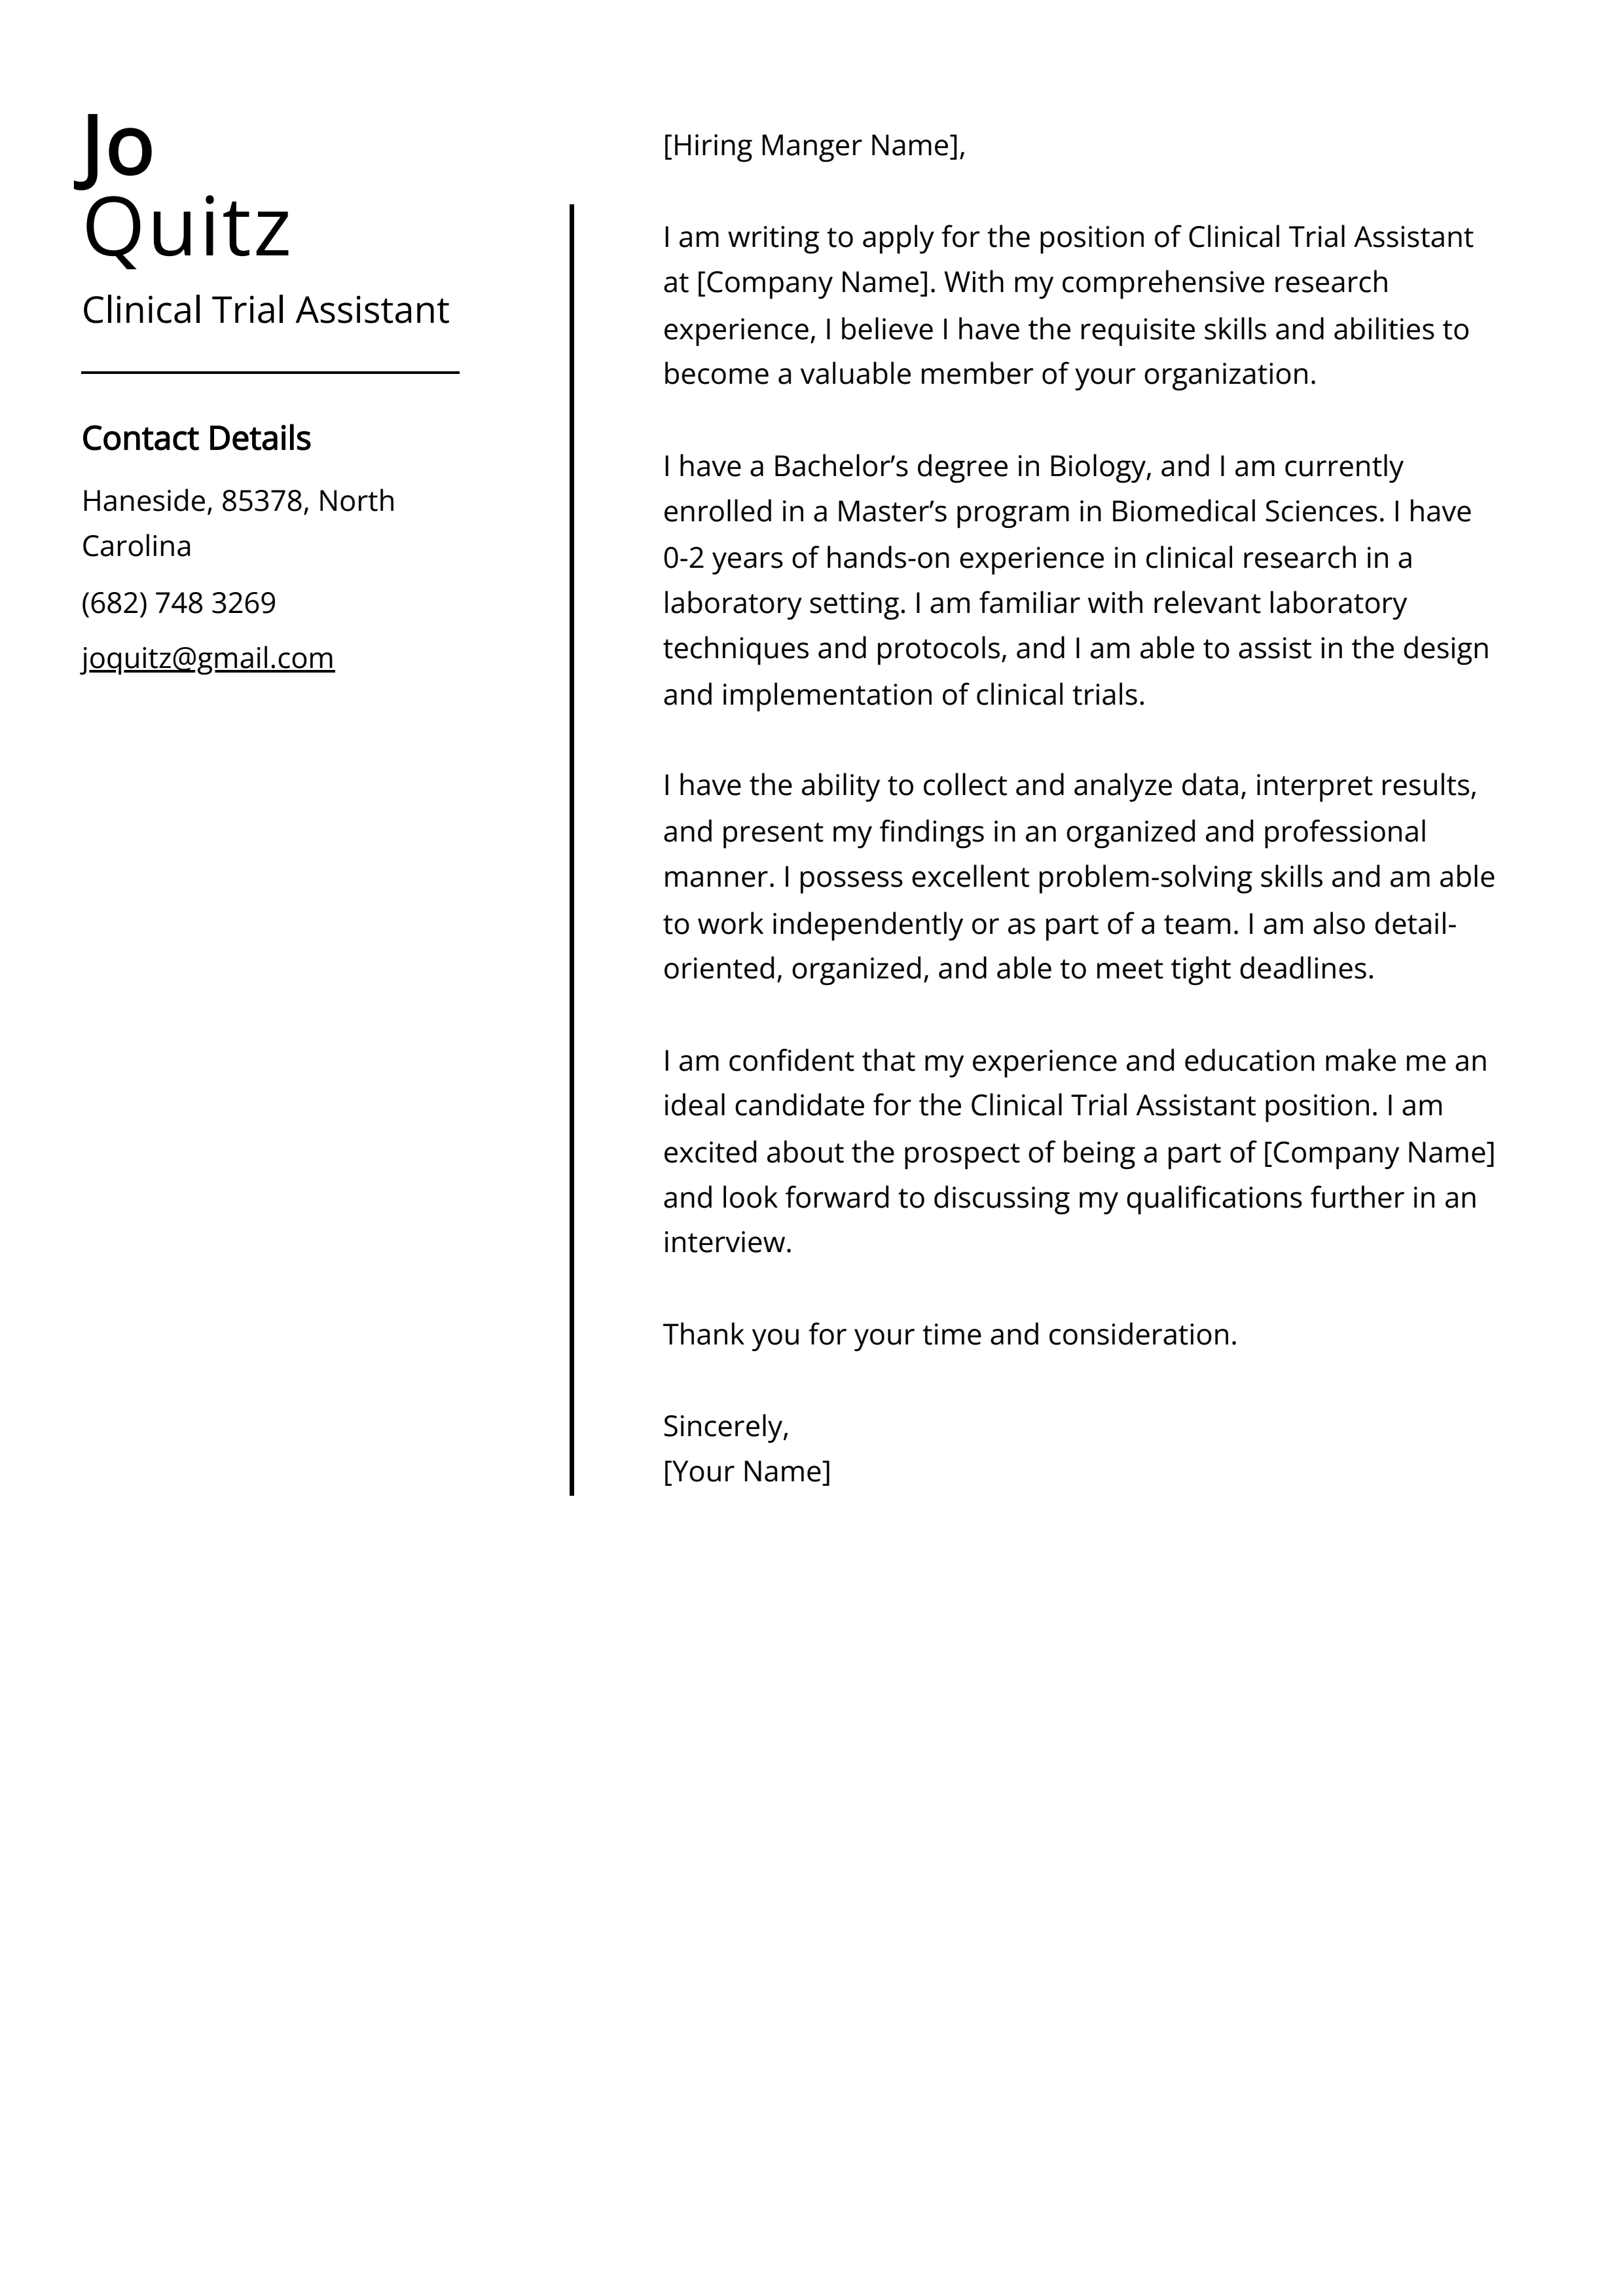 Clinical Trial Assistant Cover Letter Example